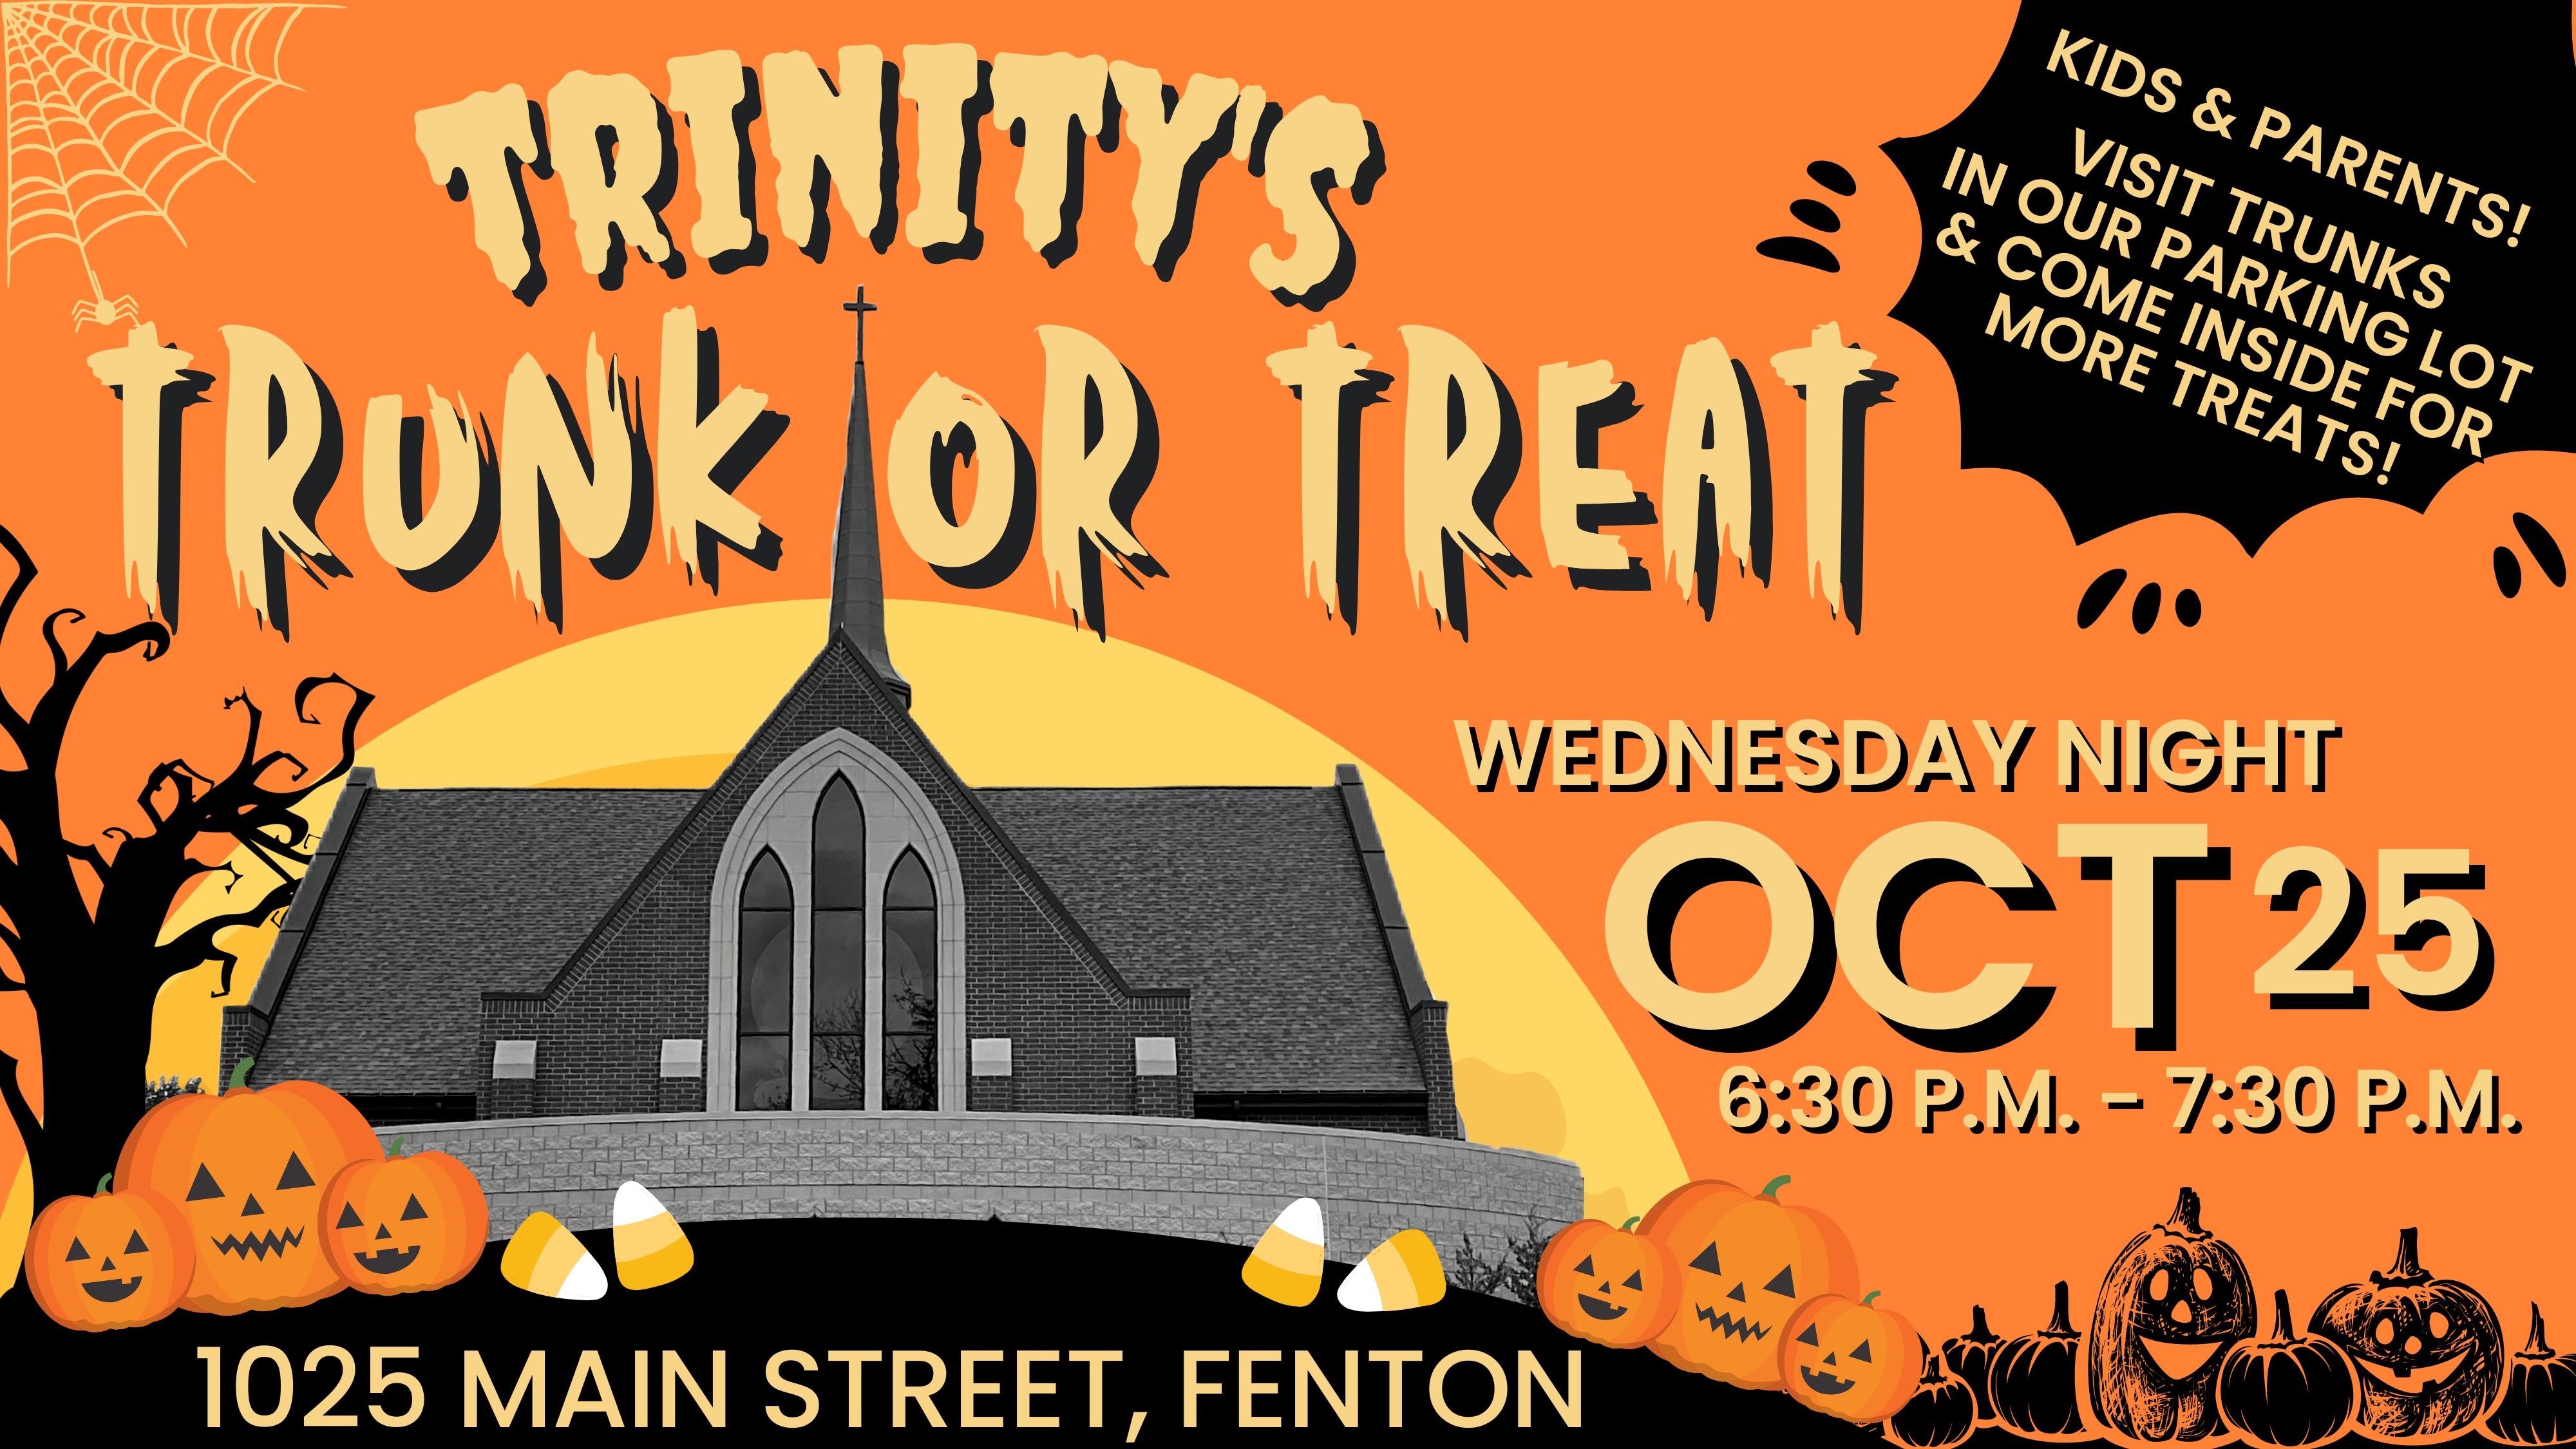 Trinity's Trunk or Treat Event Flyer